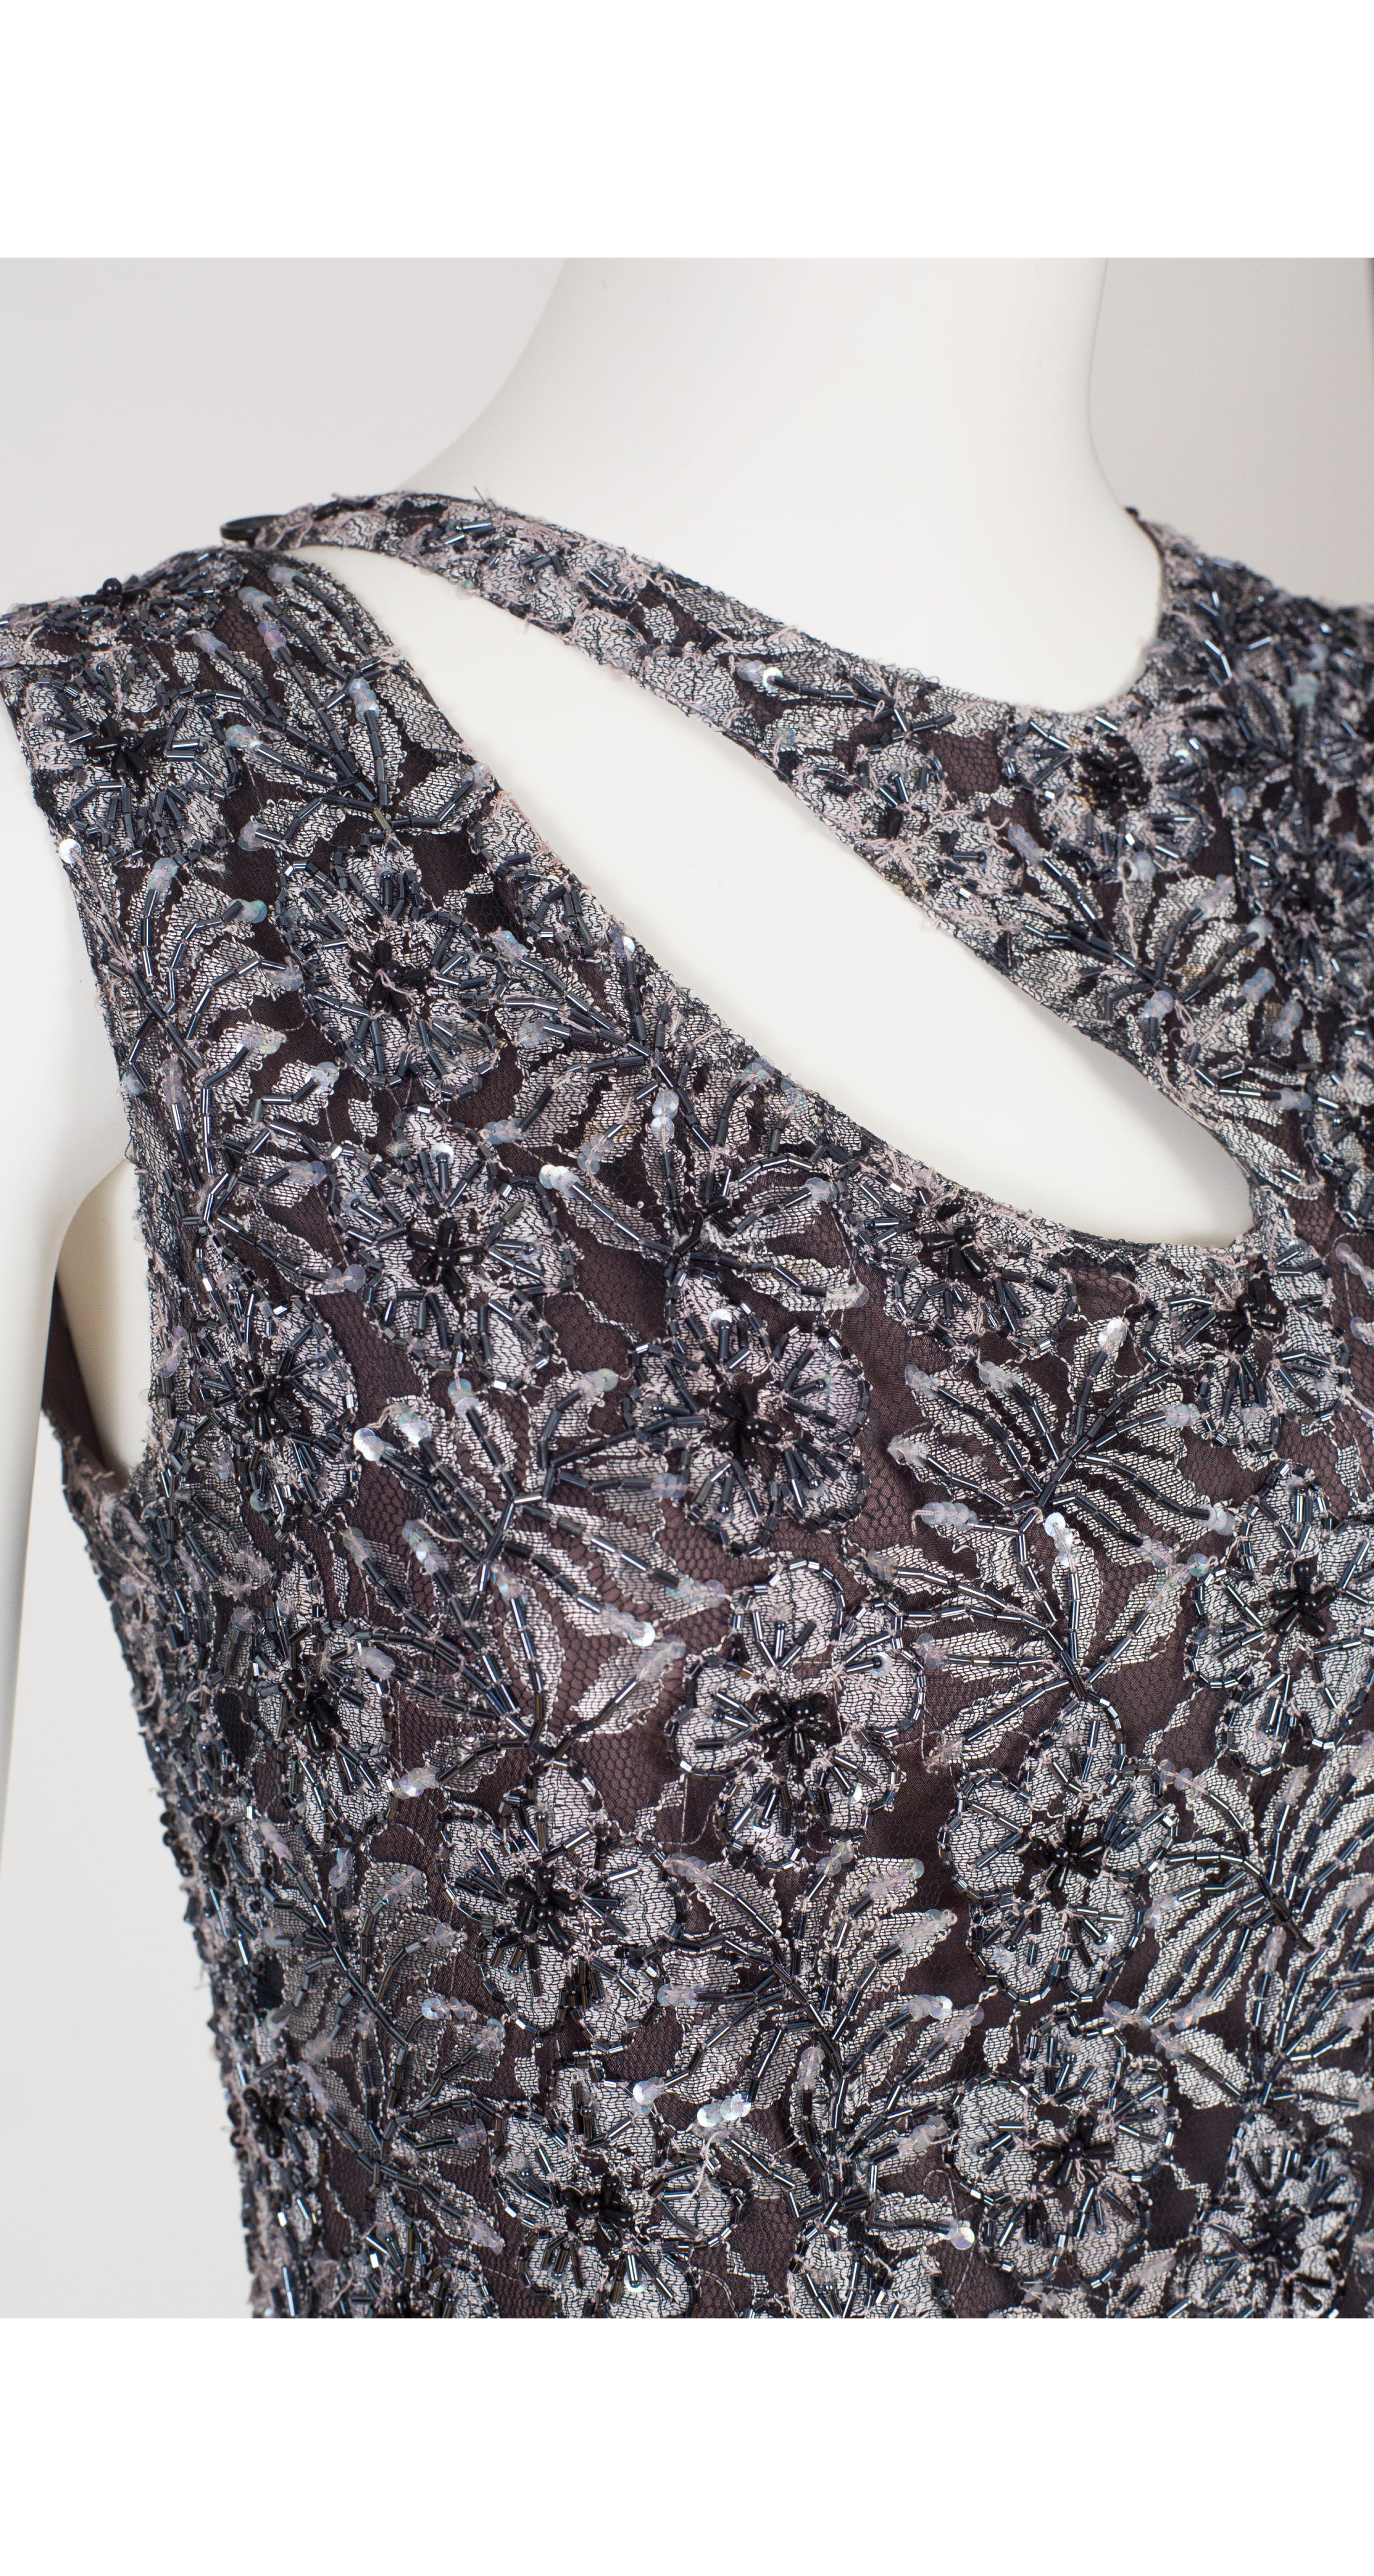 1990s Cut-Out Beaded Gray Floral Lace Evening Dress